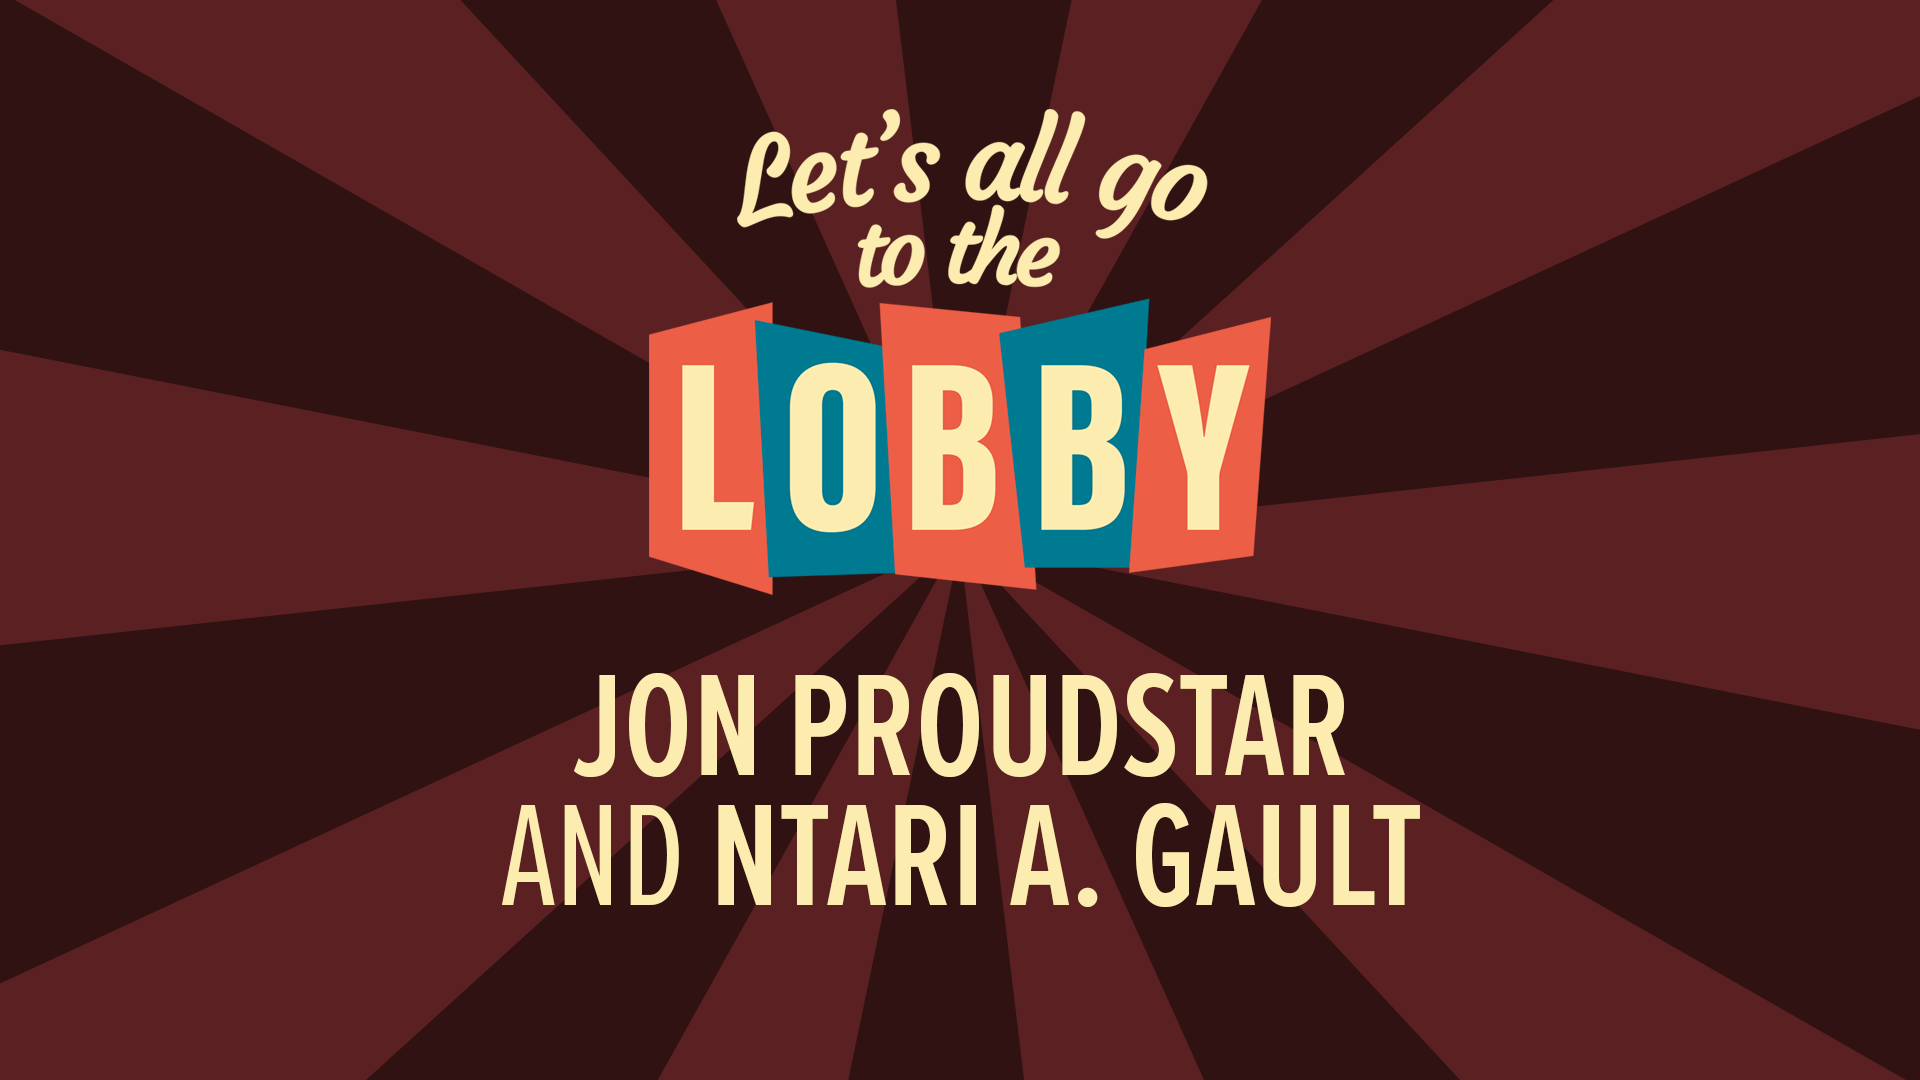 Today's Guests: Jon Proudstar and Ntari A. Gault